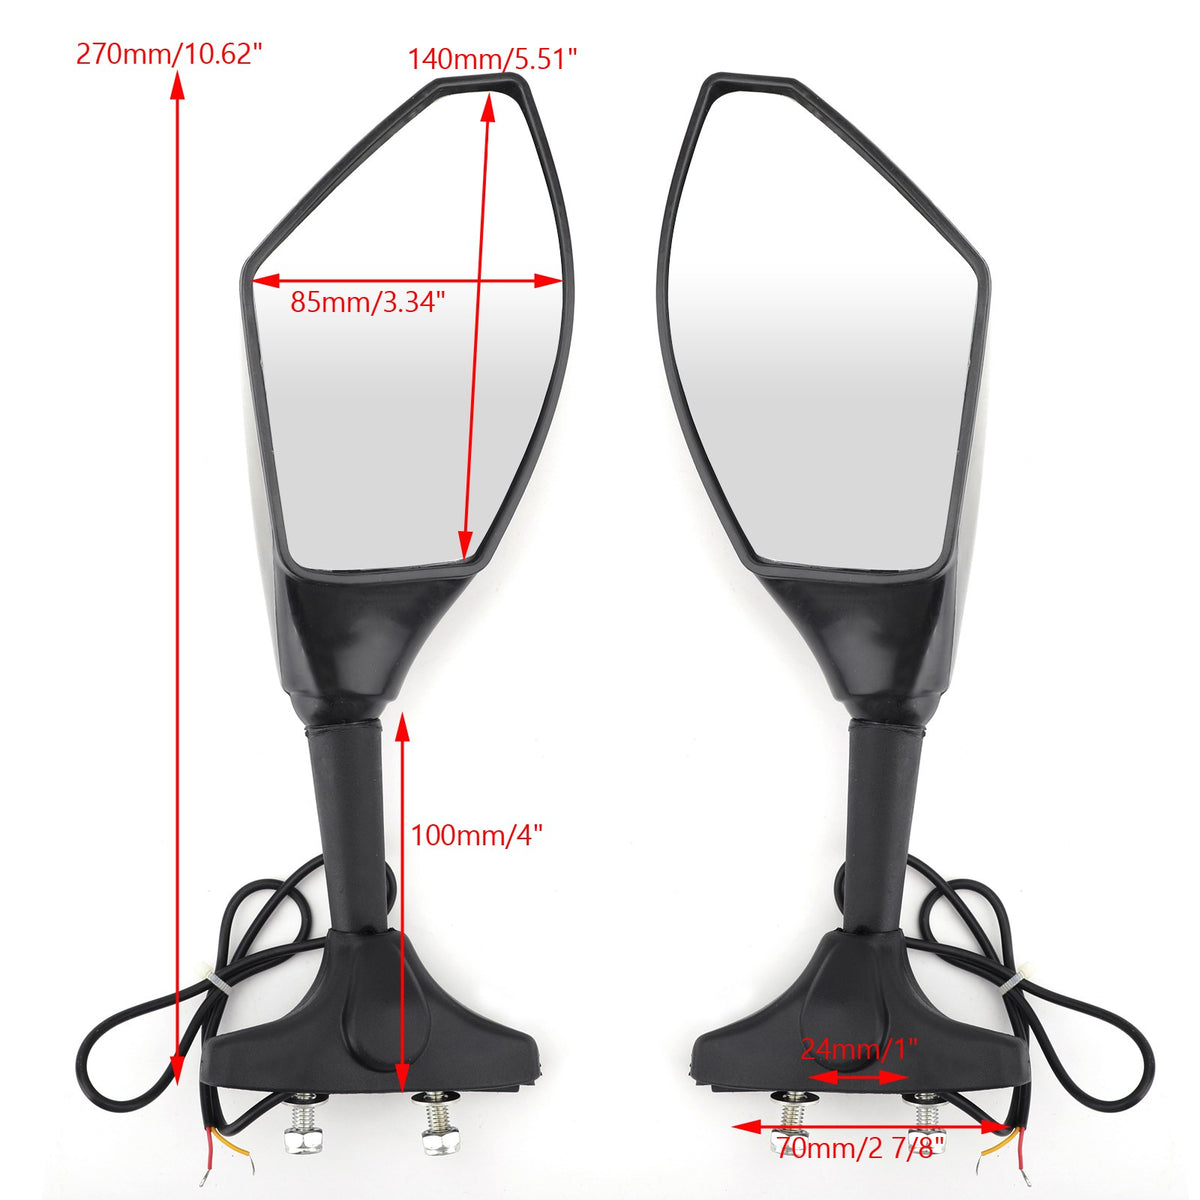 Honda CBR600F4i CBR600F4 CBR600F CBR250R Pair Rear View Side Mirrors With LED Turn Signals